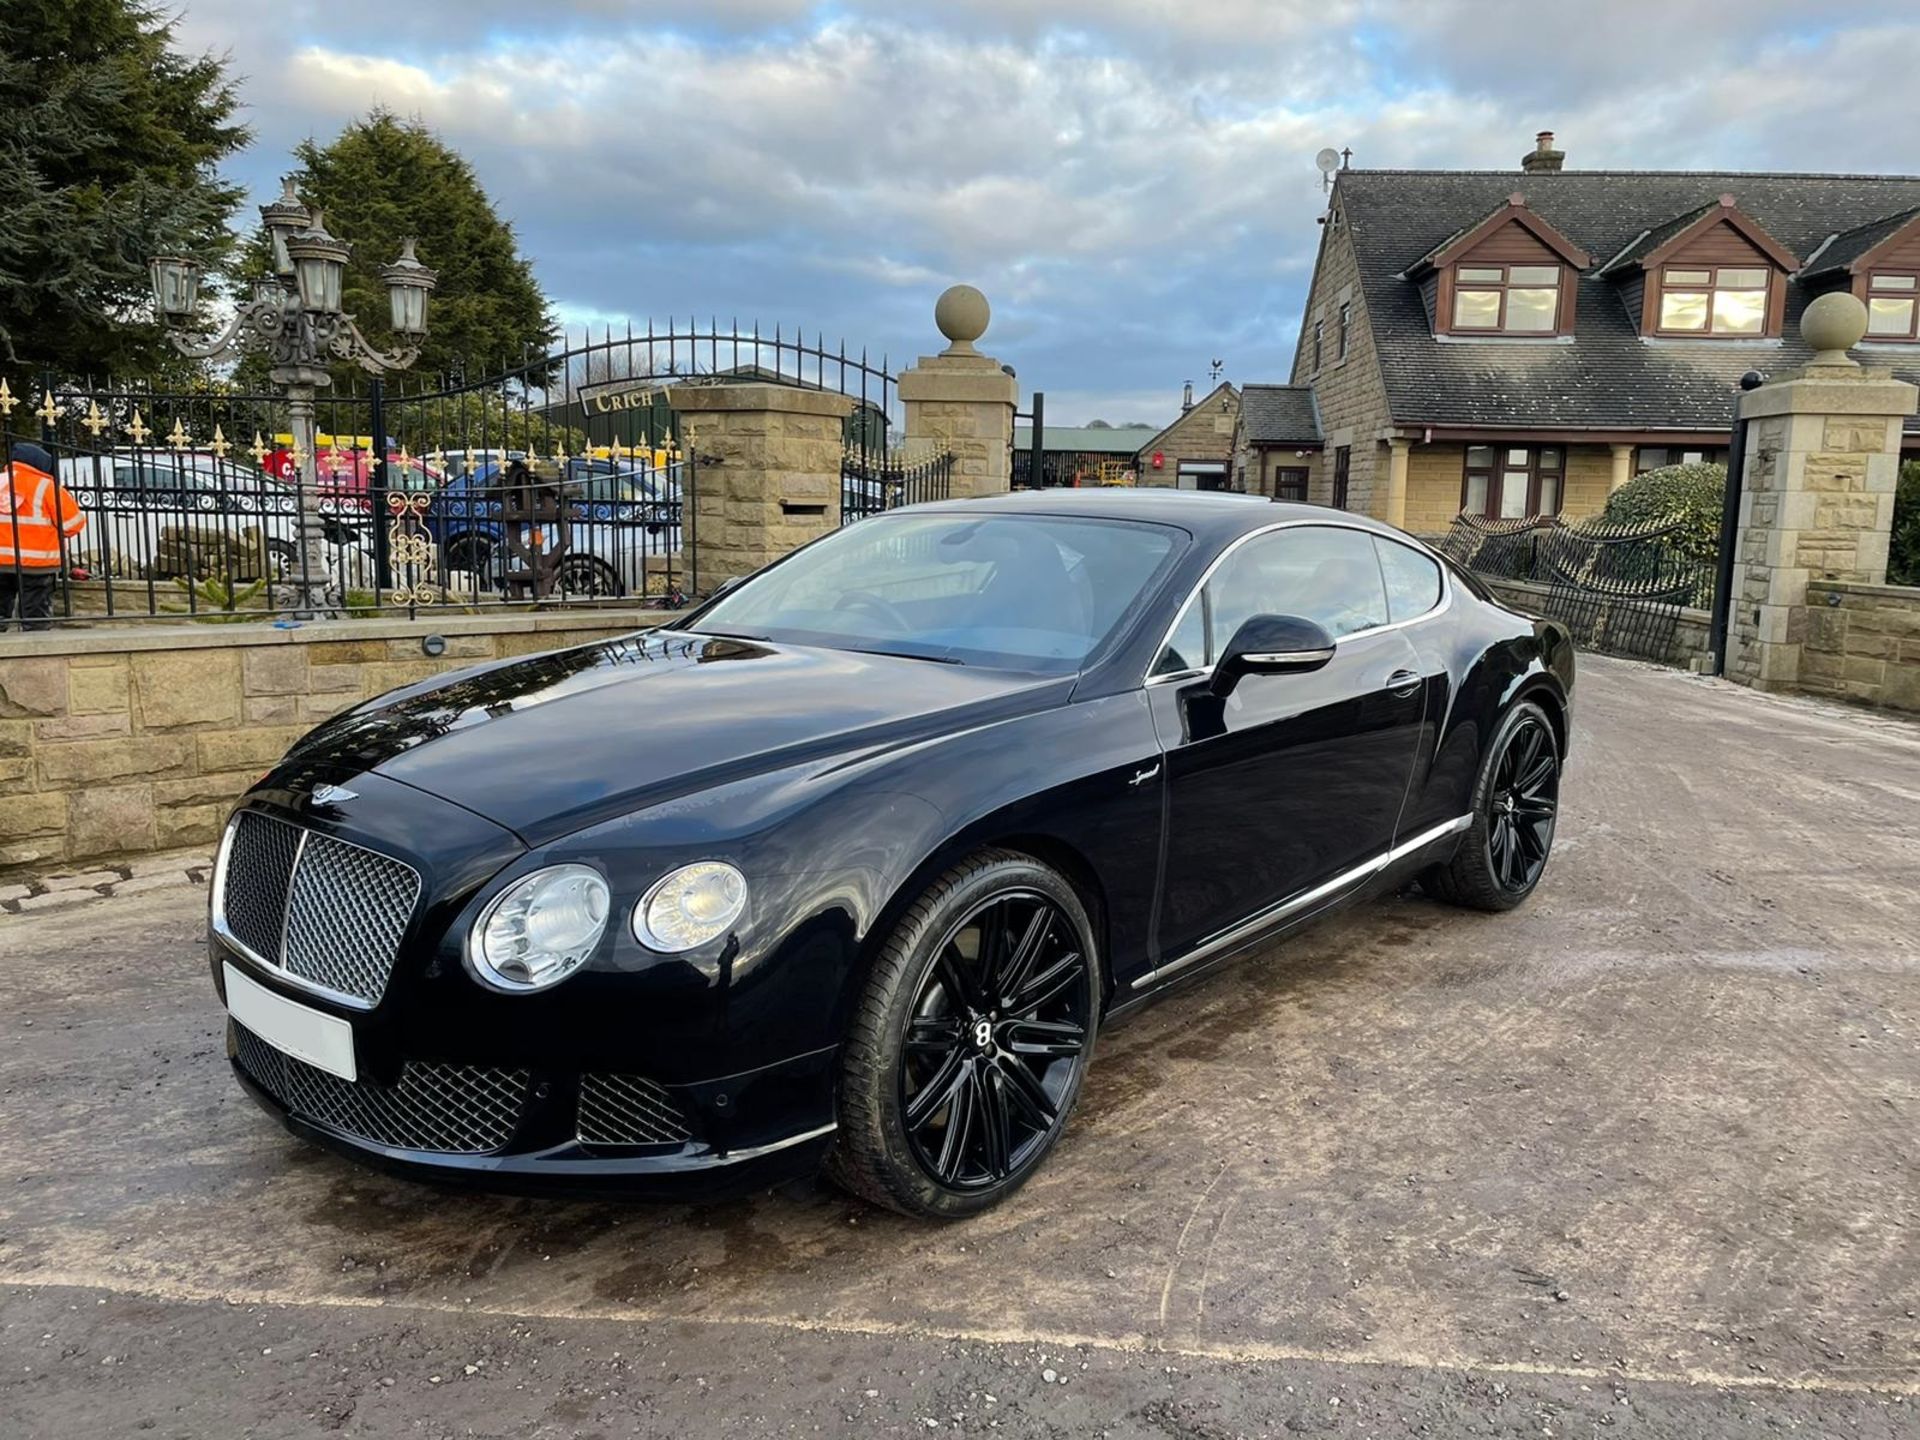 2014/14 REG BENTLEY CONTINENTAL GT SPEED 6.0 AUTO BLACK COUPE 626 HP- FULL BENTLEY SERVICE HISTORY - Image 3 of 26